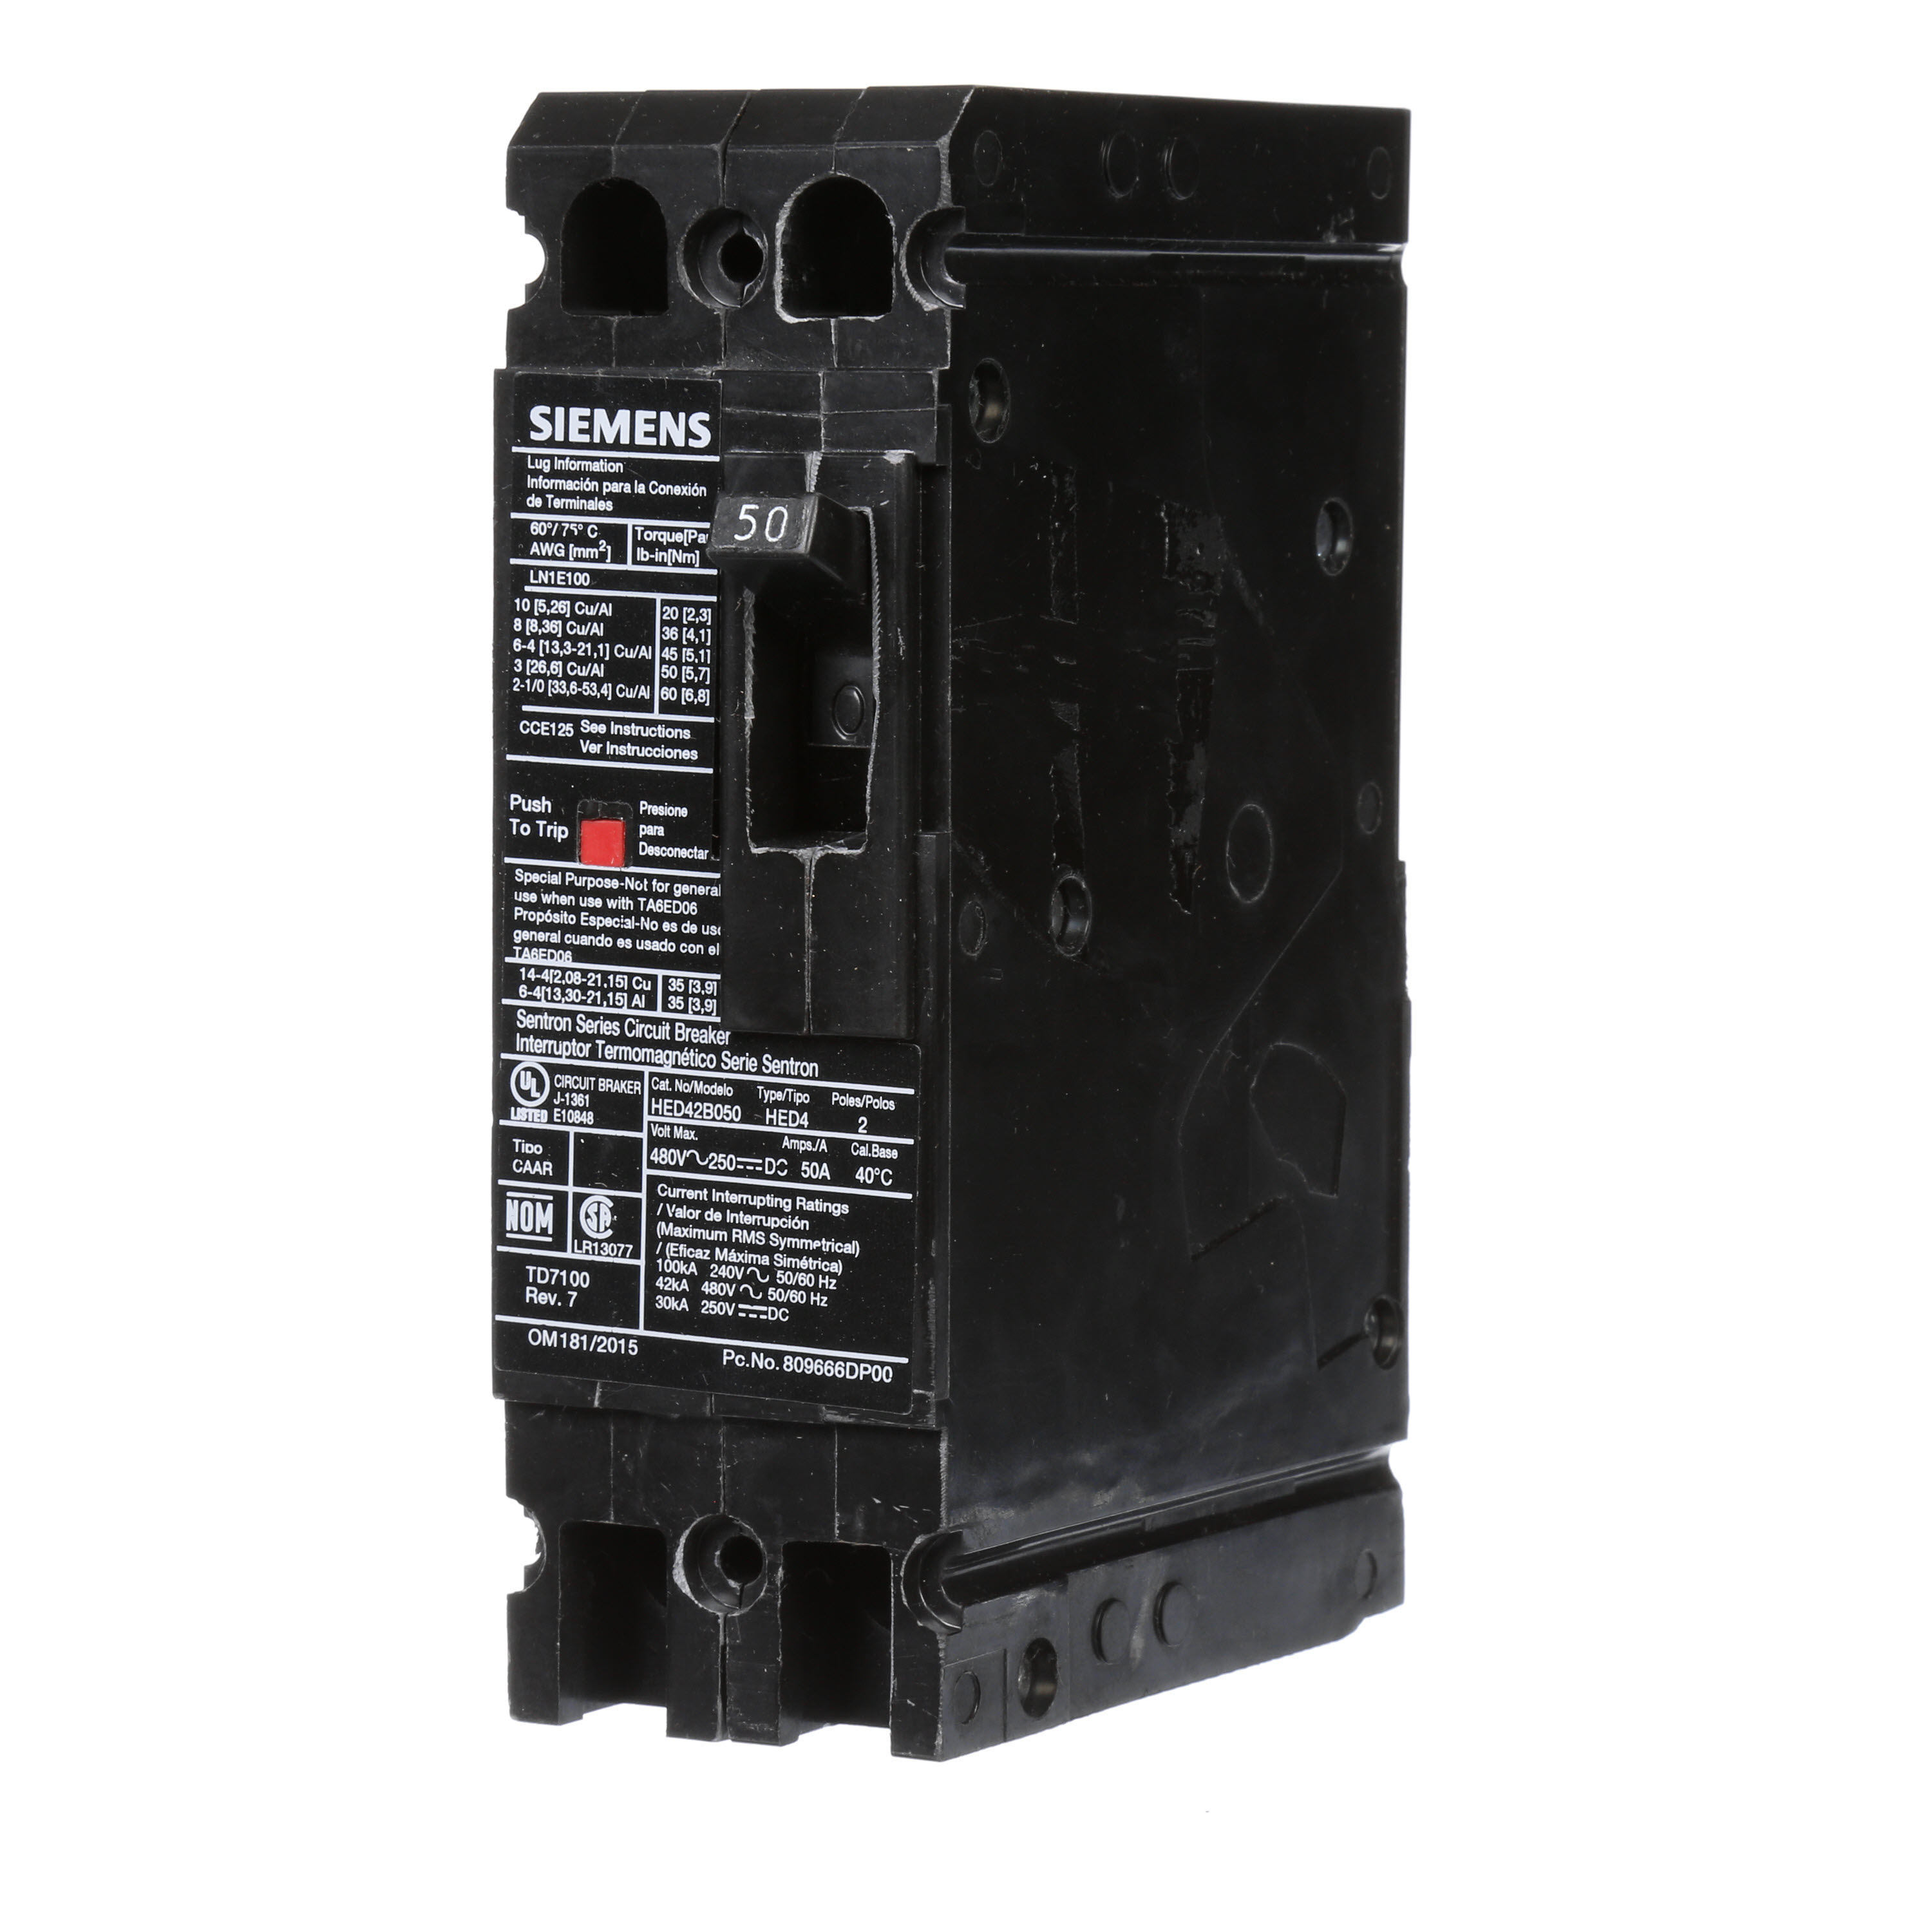 SIEMENS LOW VOLTAGE SENTRON MOLDED CASE CIRCUIT BREAKER WITH THERMAL - MAGNETICTRIP UNIT. STANDARD 40 DEG C BREAKER ED FRAME WITH HIGH BREAKING CAPACITY. 50A 2-POLE (42KAIC AT 480V). NON-INTERCHANGEABLE TRIP UNIT. SPECIAL FEATURES LOAD LUGS ONLY (LN1E100) WIRE RANGE 10 - 1/0AWG (CU/AL). DIMENSIONS (W x H x D) IN 2.00x 6.4 x 3.92.